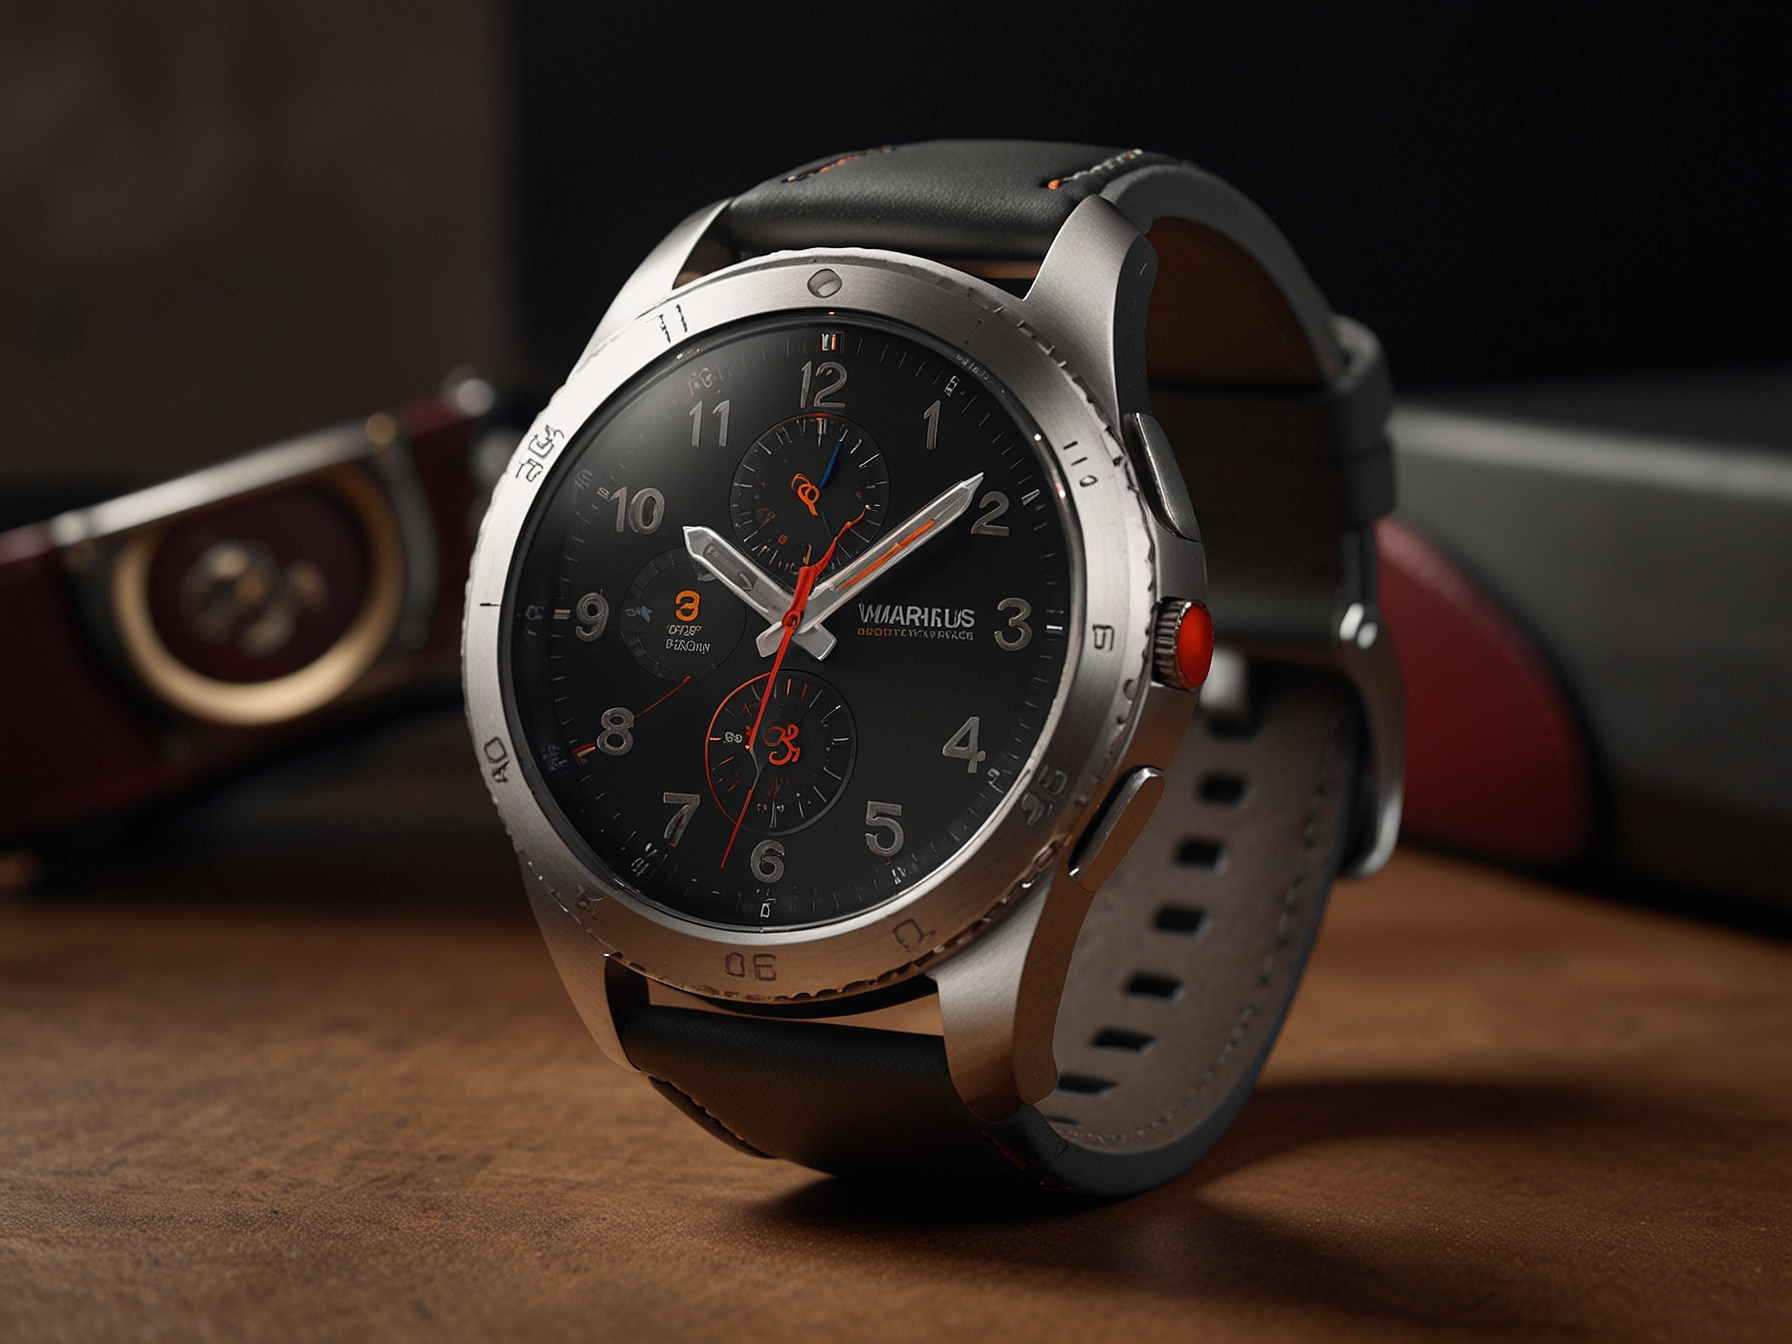 The Galaxy Watch Ultra is displayed in sophisticated colors like Graphite Black, Titanium Silver, and Rogue Red, alongside professional accessories such as a briefcase and glasses, emphasizing its premium and business-friendly design.